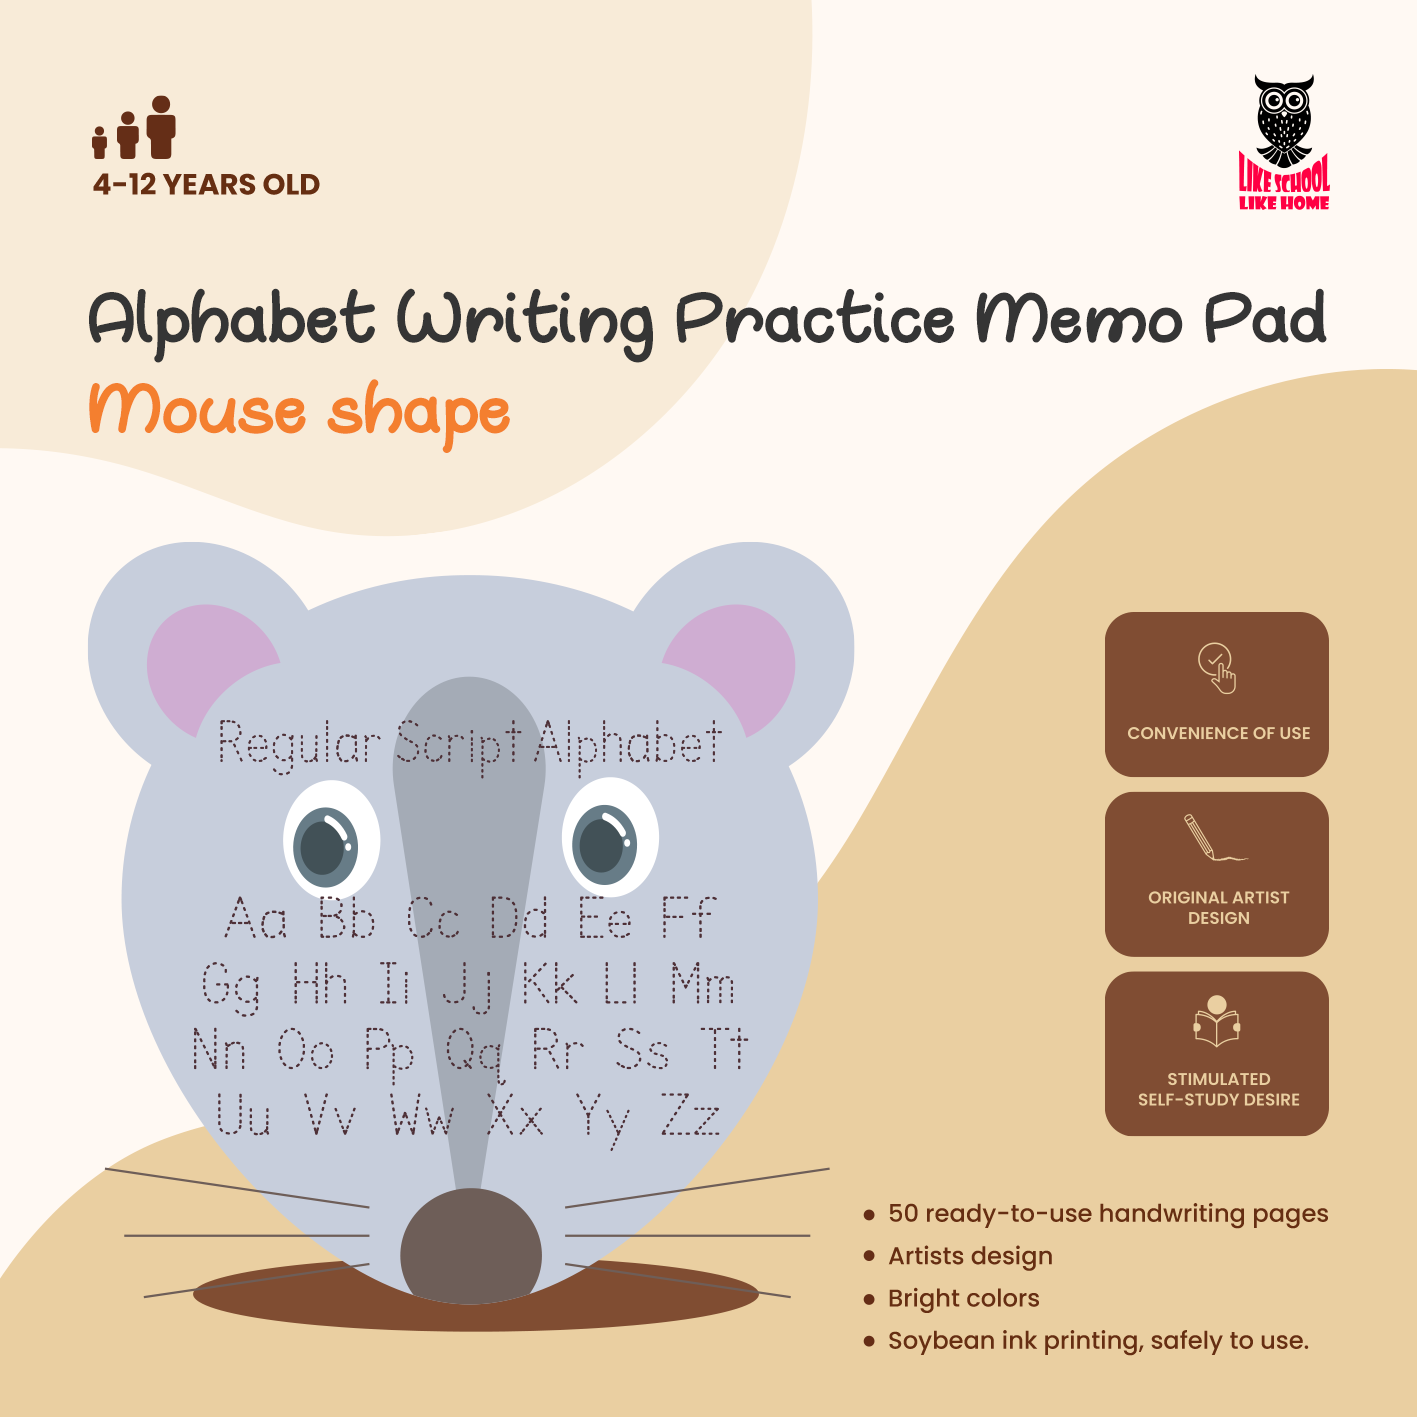 Alphabet Writing Practice Mouse-Shaped Memo Pad